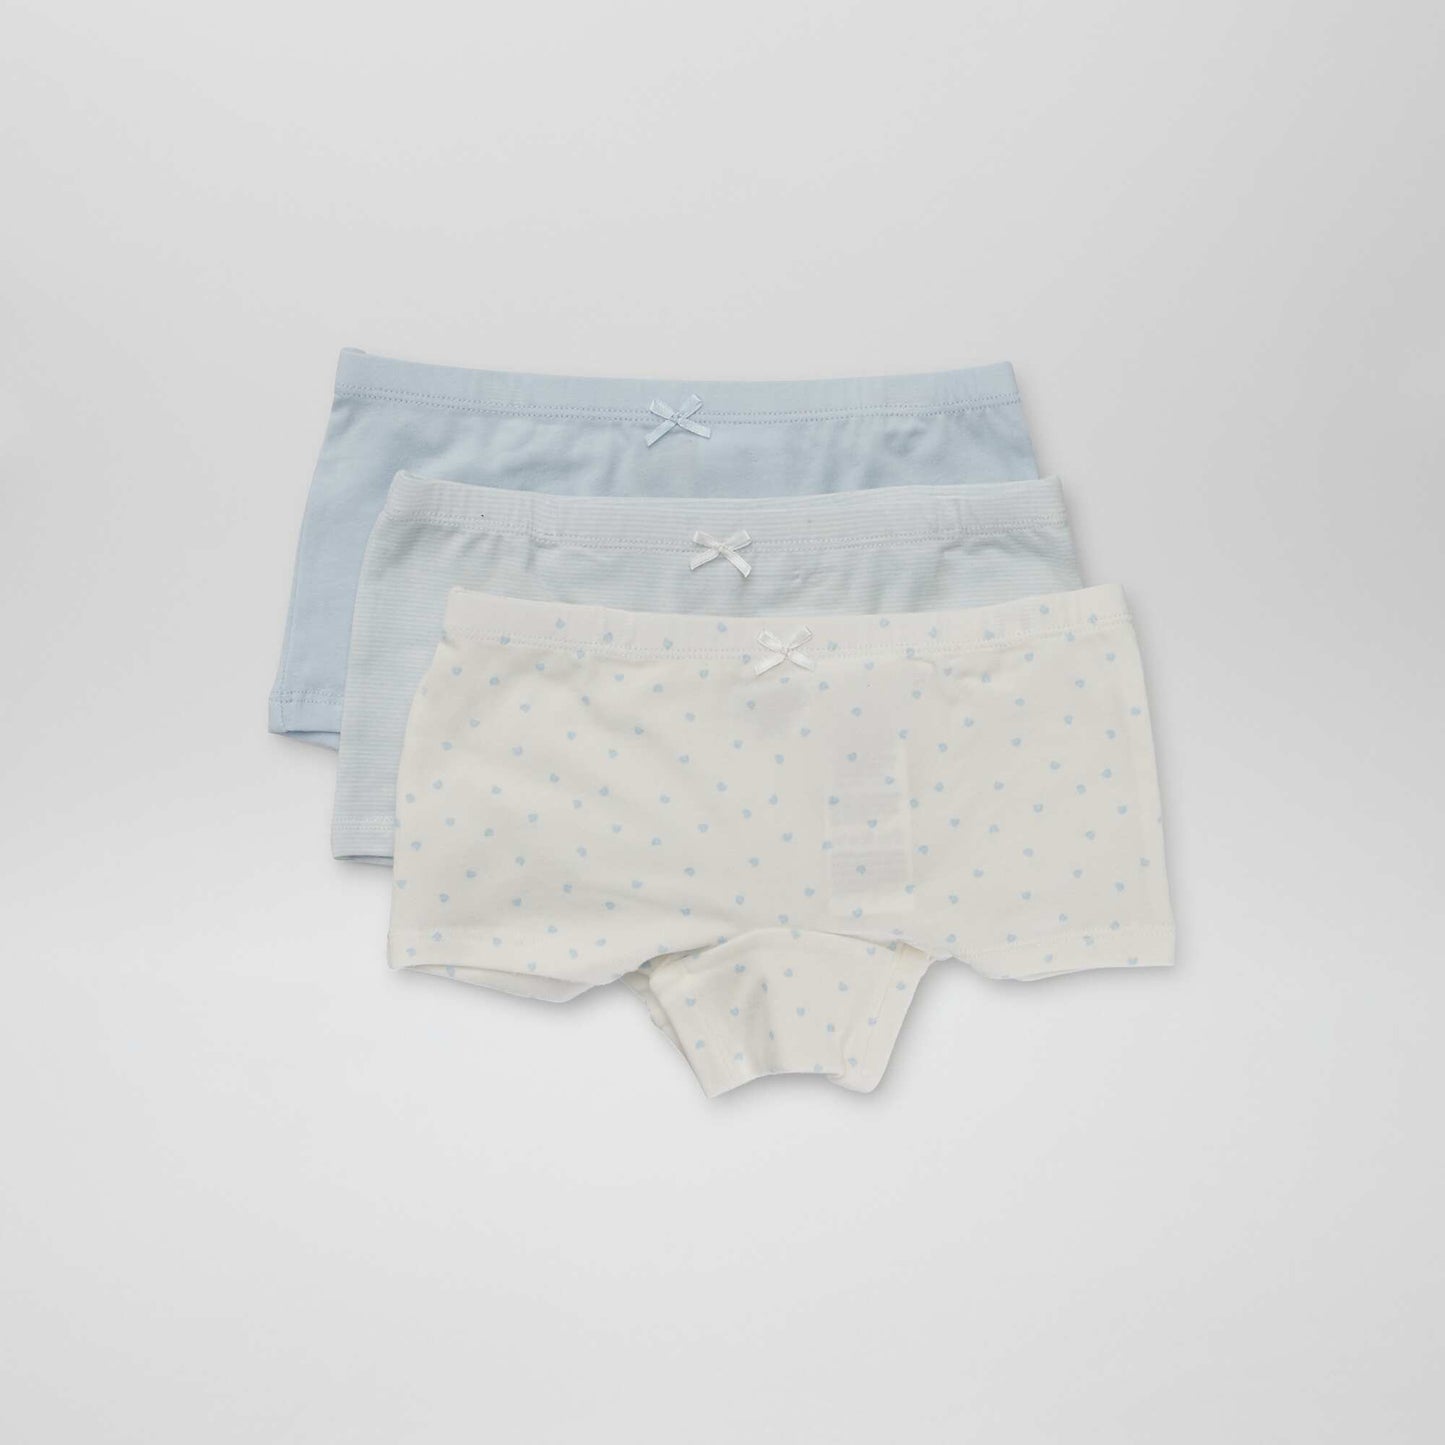 Pack of 3 pairs of boy shorts BLUE